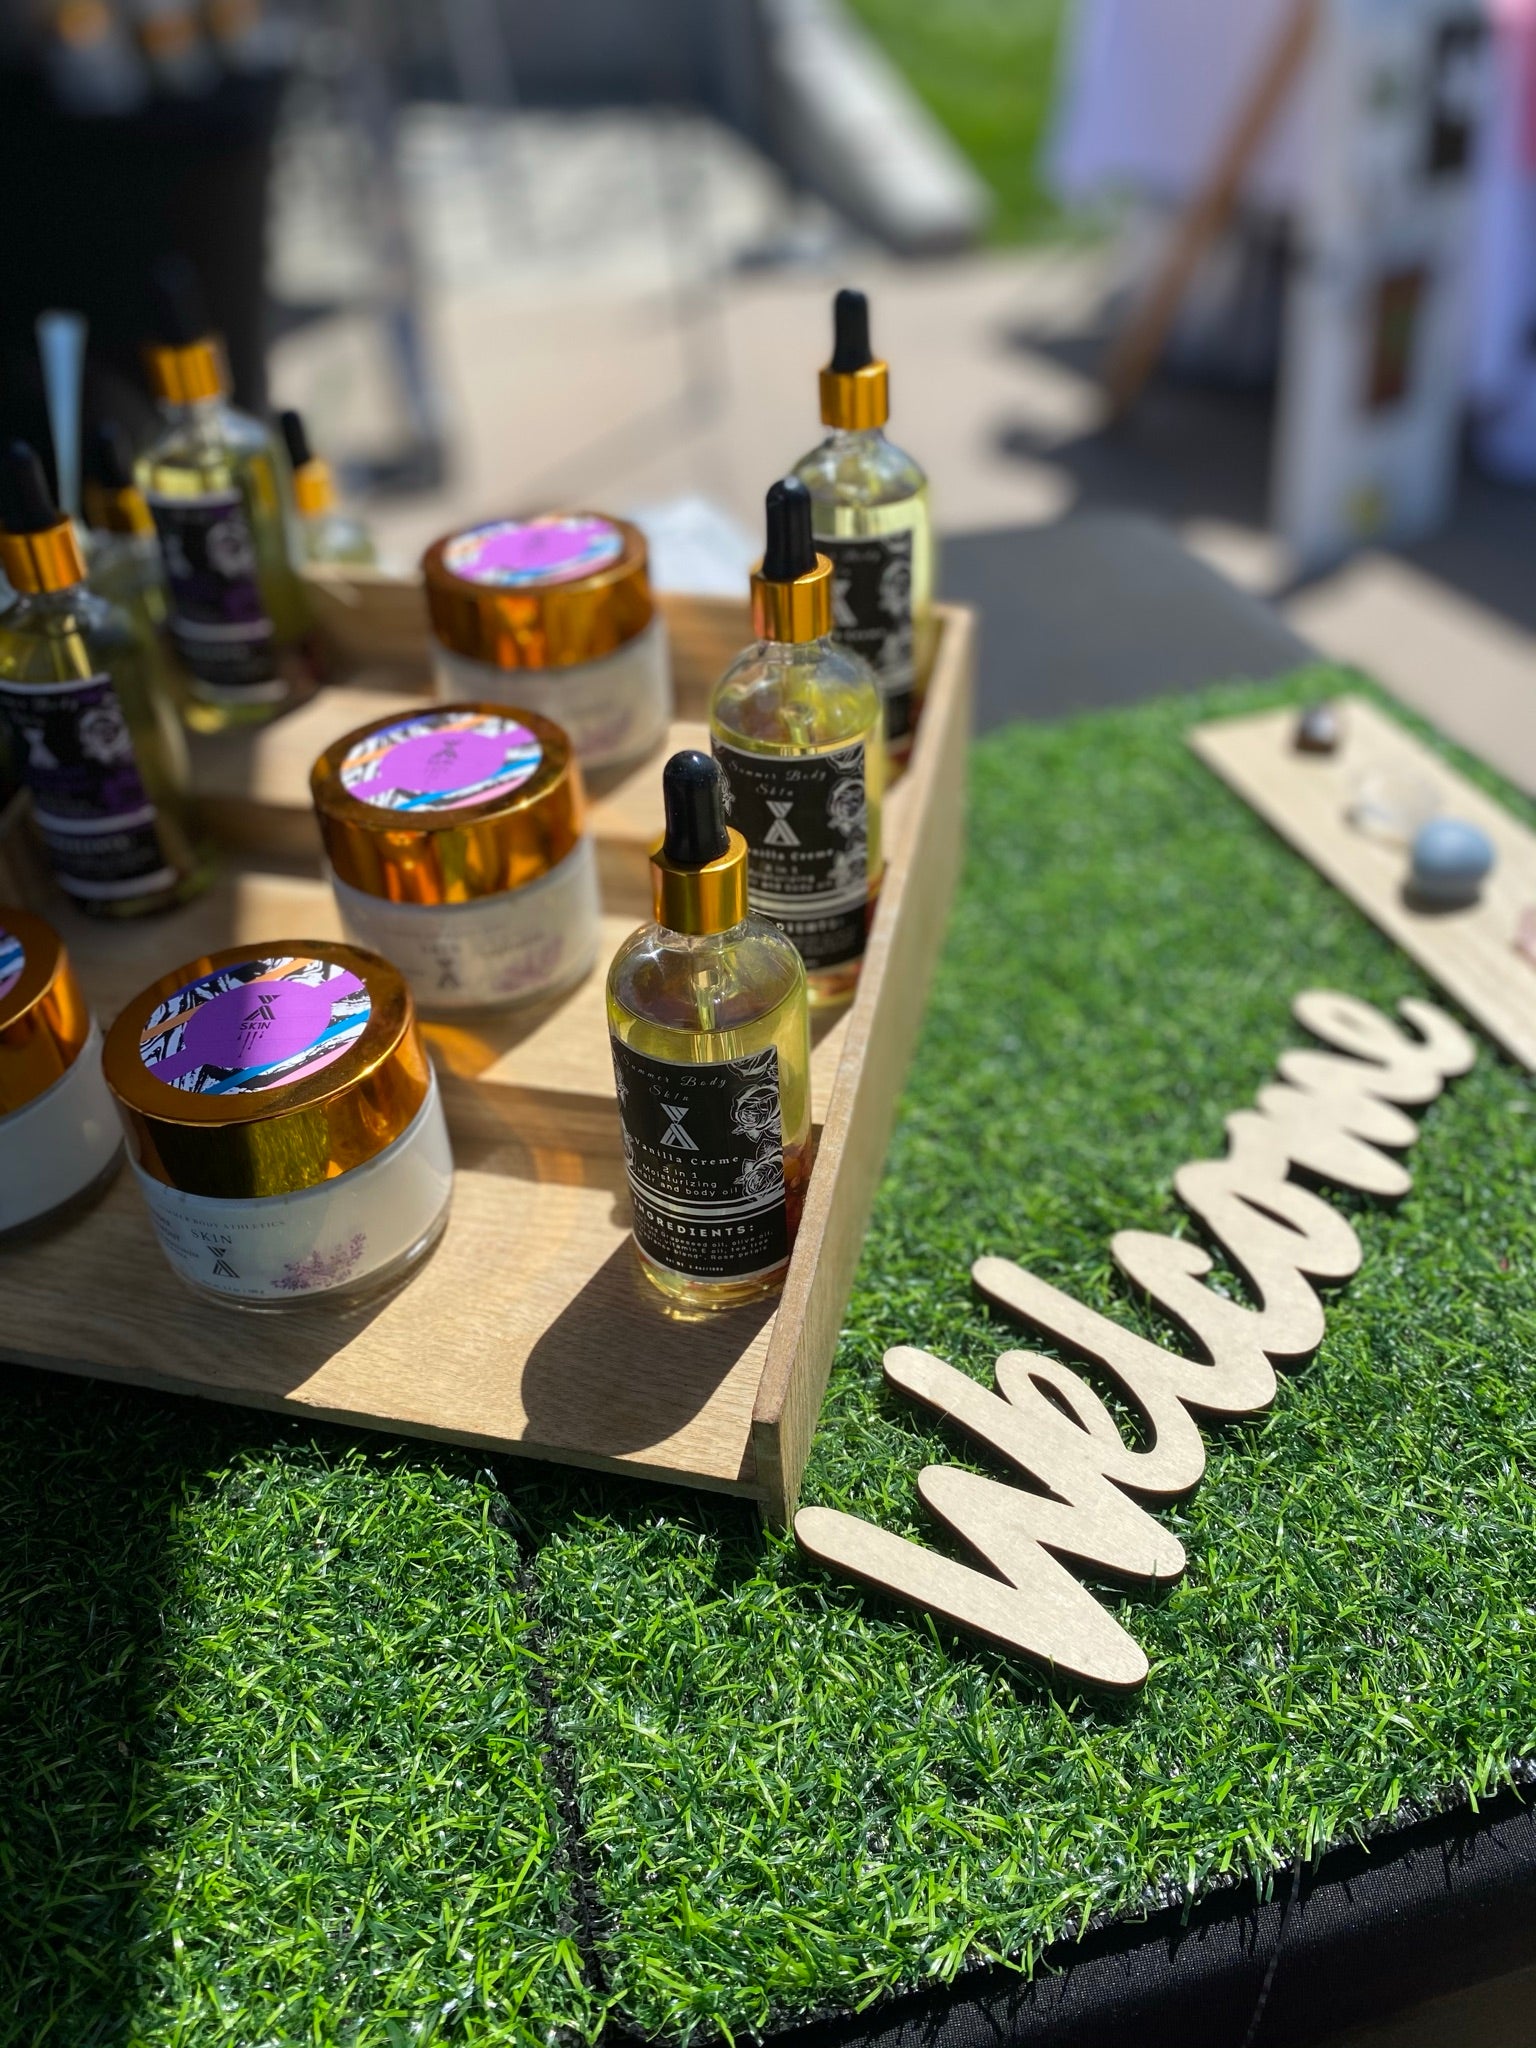 A vendor table covered with a grass top and three tier stairs to display cosmetics. Each bertical row displays a beautiful gold glass bottle containing scent body care made with all natural ingredients. The packaging design is colorful, clean, and culturally authentic.